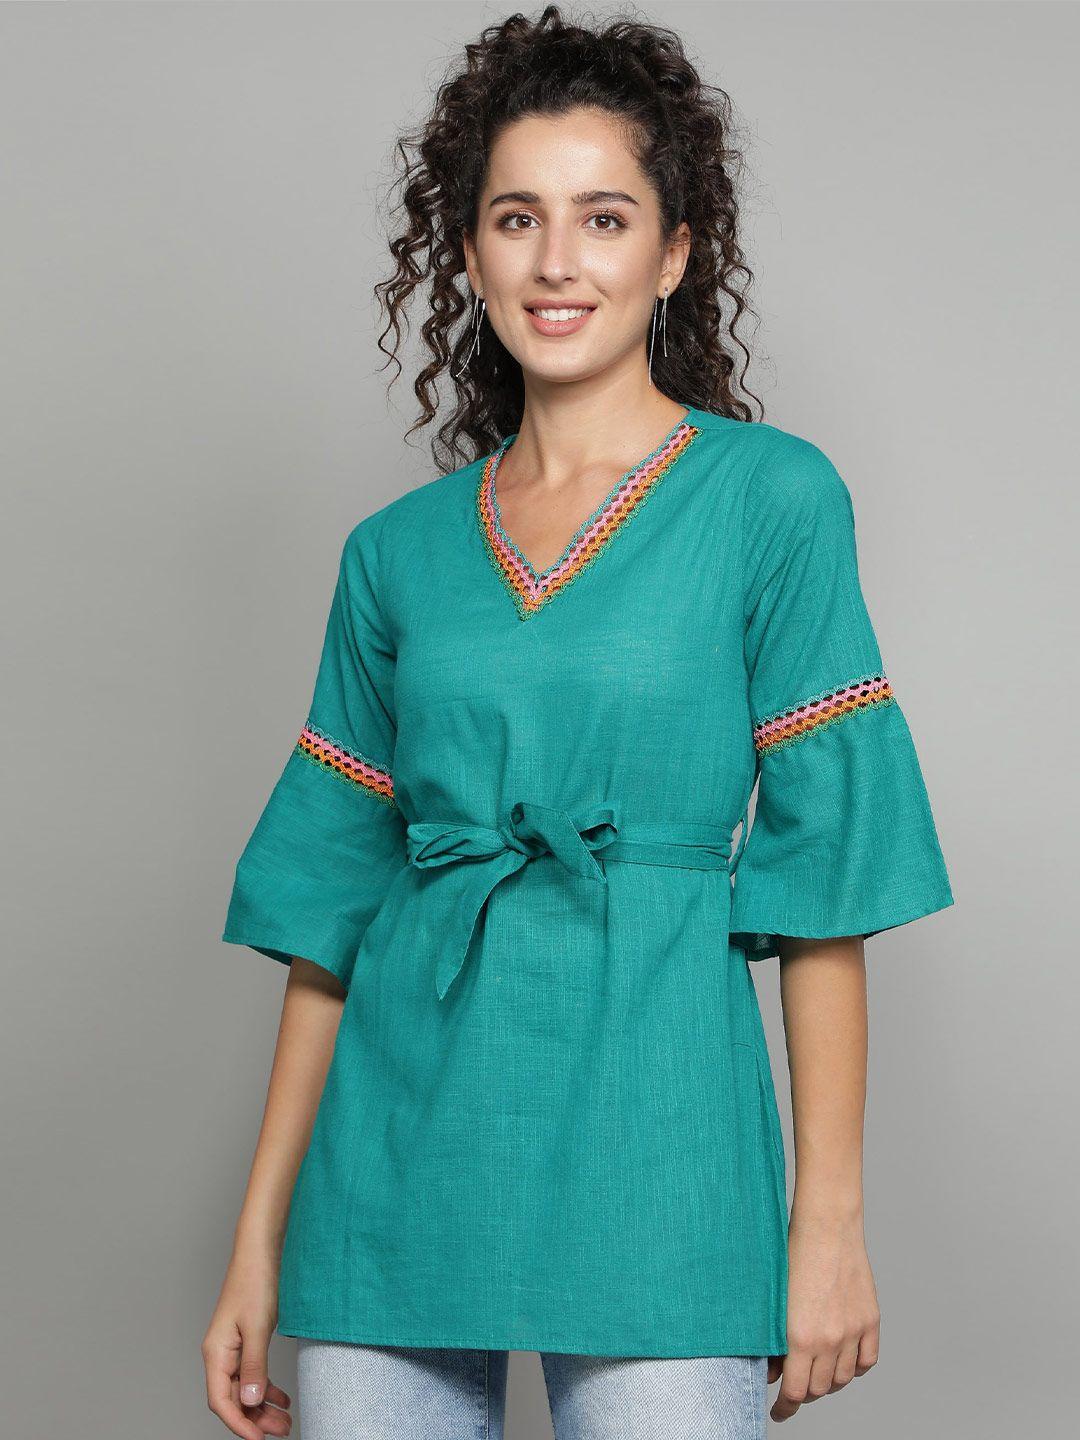 cot'n soft green woven design v-neck flared sleeves pure cotton kurti